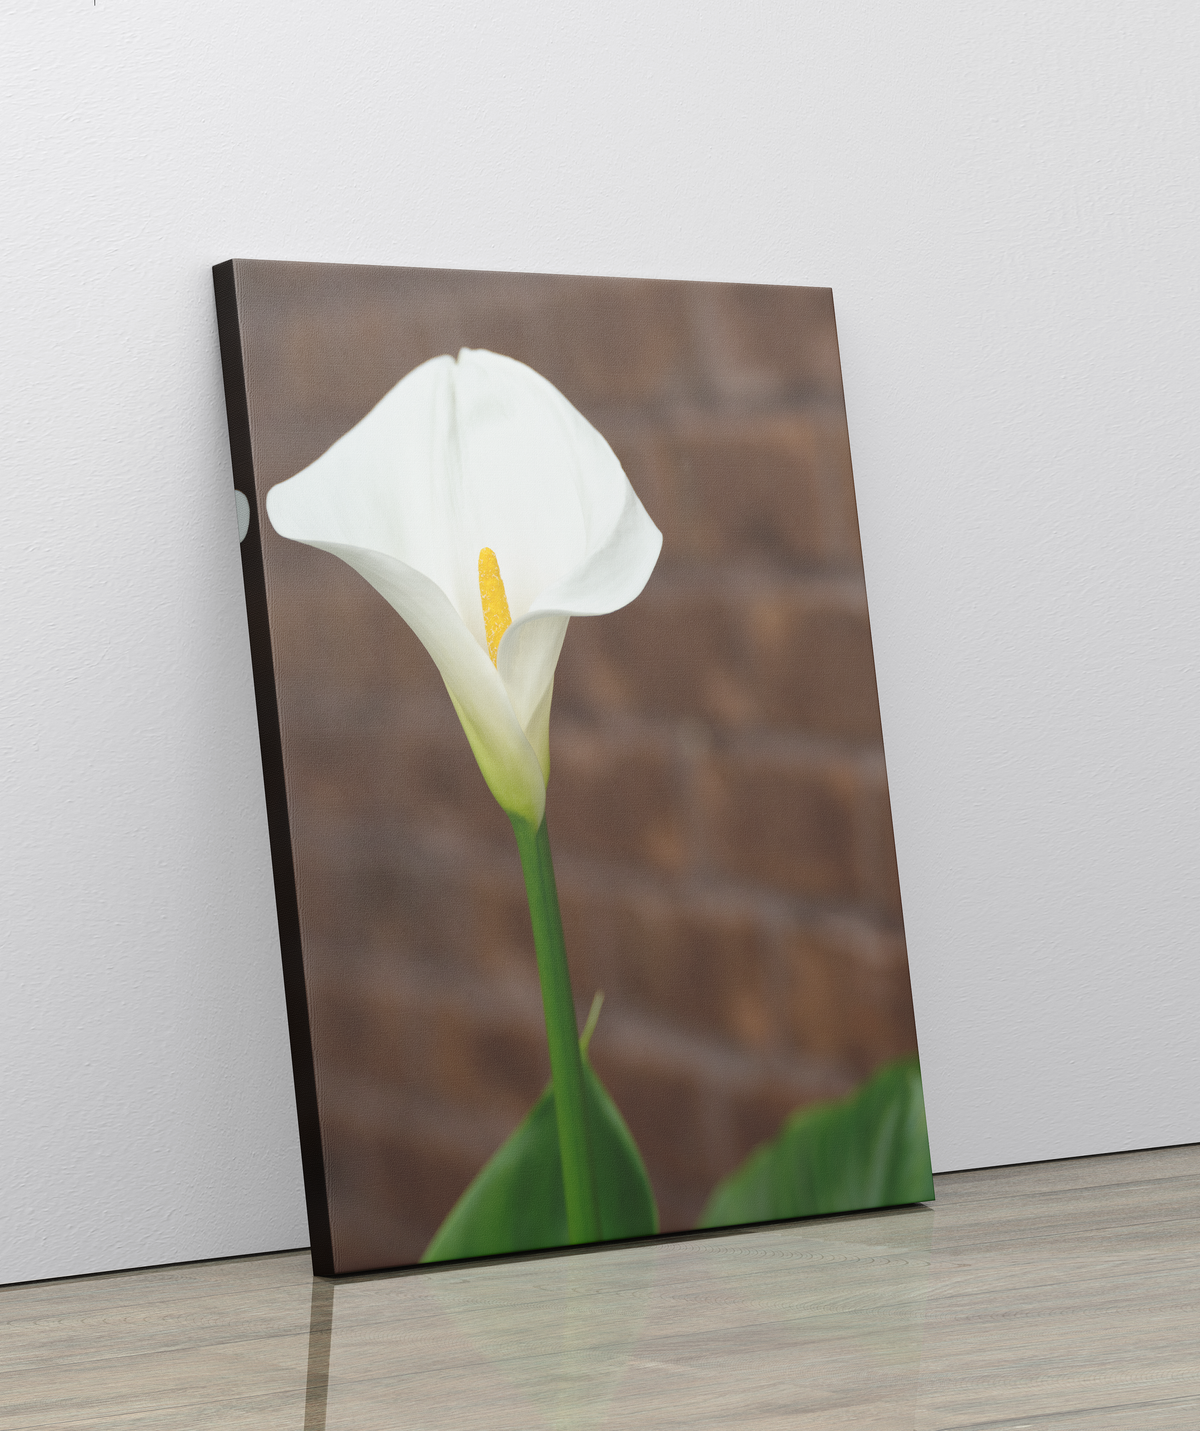 Canvas wrap with a white lily flower in full bloom in front of a brown brick wall.   NOTES:  Lily flower in bloom Brick wall background Made to Order Designer: @Makkersmedia Canvas Wrap:  Produced in-house. Printing by HP commercial wide-format printers. MATERIAL:  Aurora Expressions Poly/Cotton Canvas with Satin/Matte Finish  Base Color: White